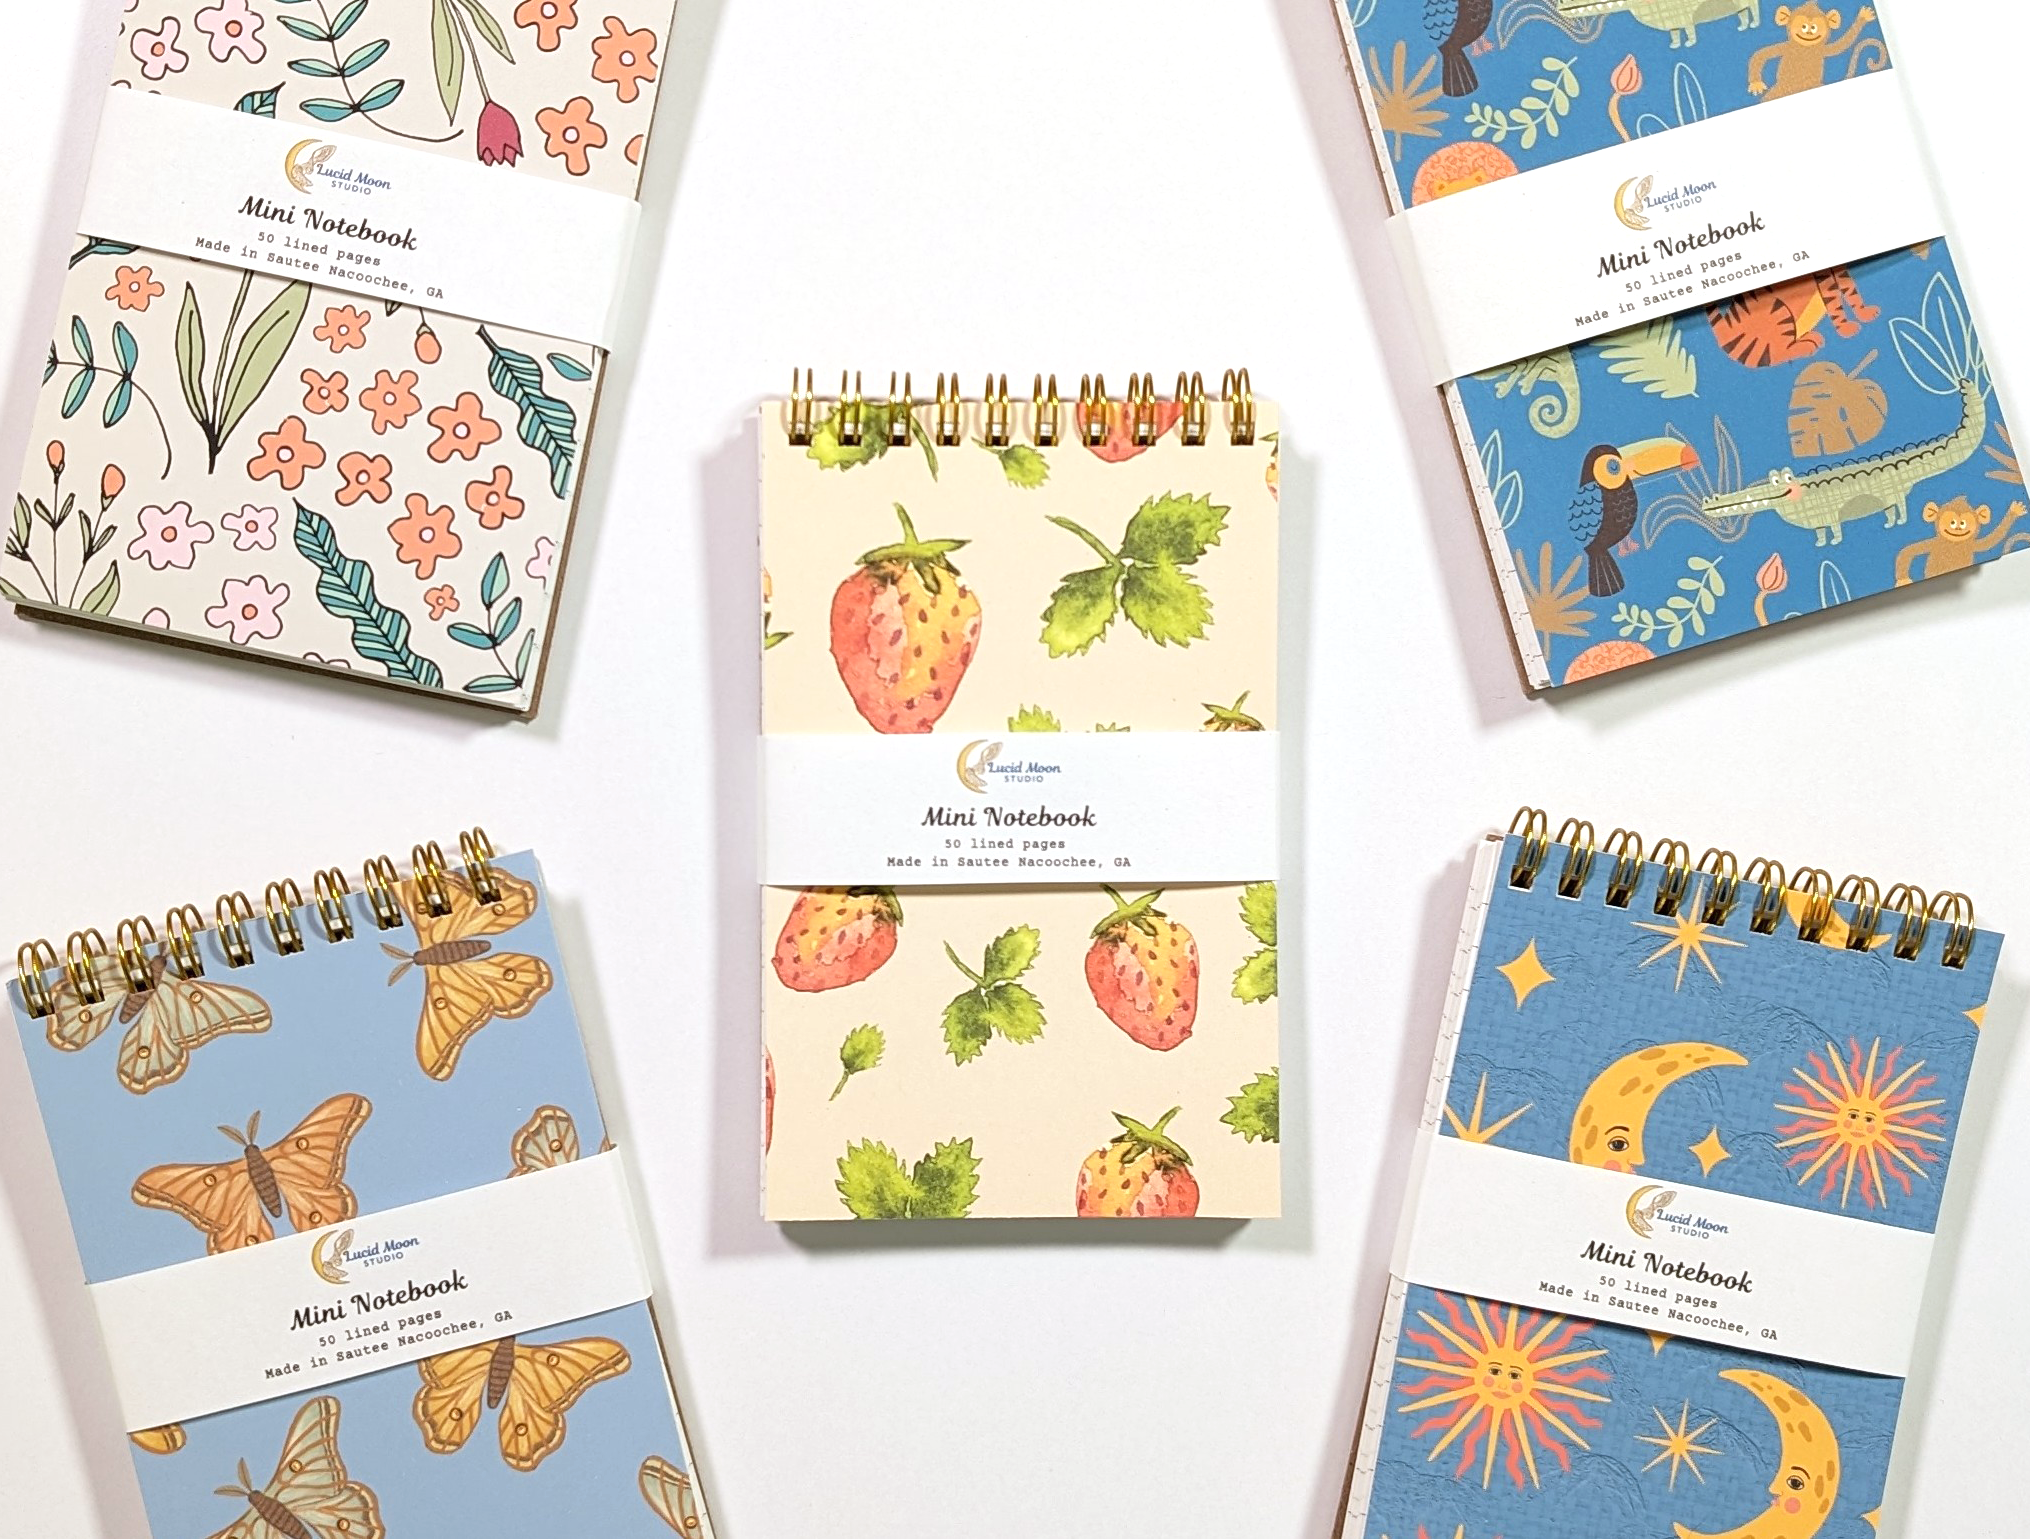 A selection of our top spiral-bound eco-friendly jotter notebooks featuring hand-drawn colorful designs inspired by nature